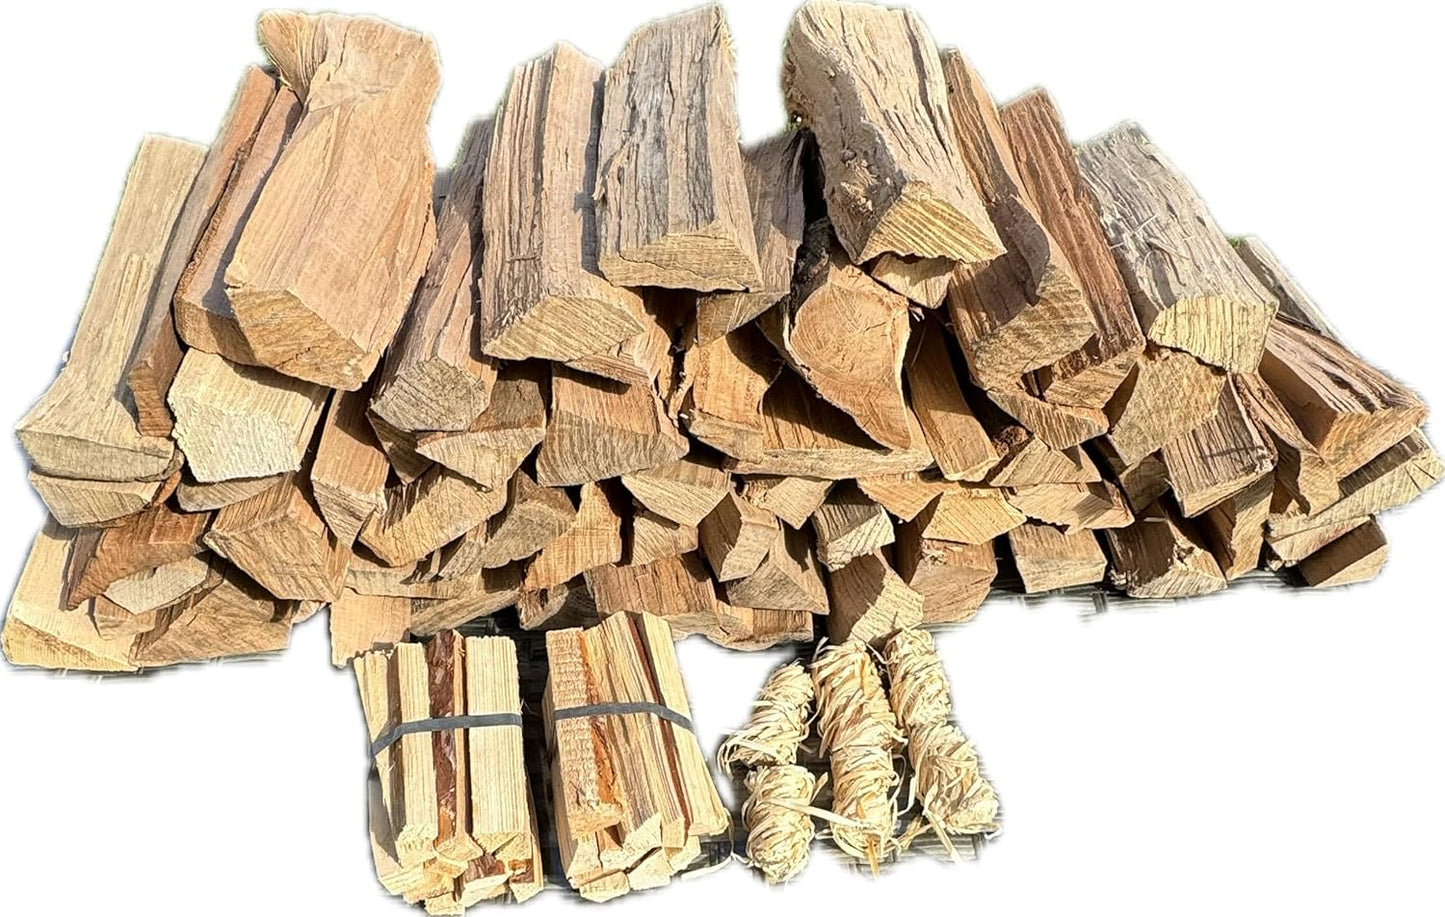 Barbecue Kiln Dried Hardwood Logs/Pizza Oven Logs/Firepits Logs/Outdoor Cooking Fuel 44 Litre Box